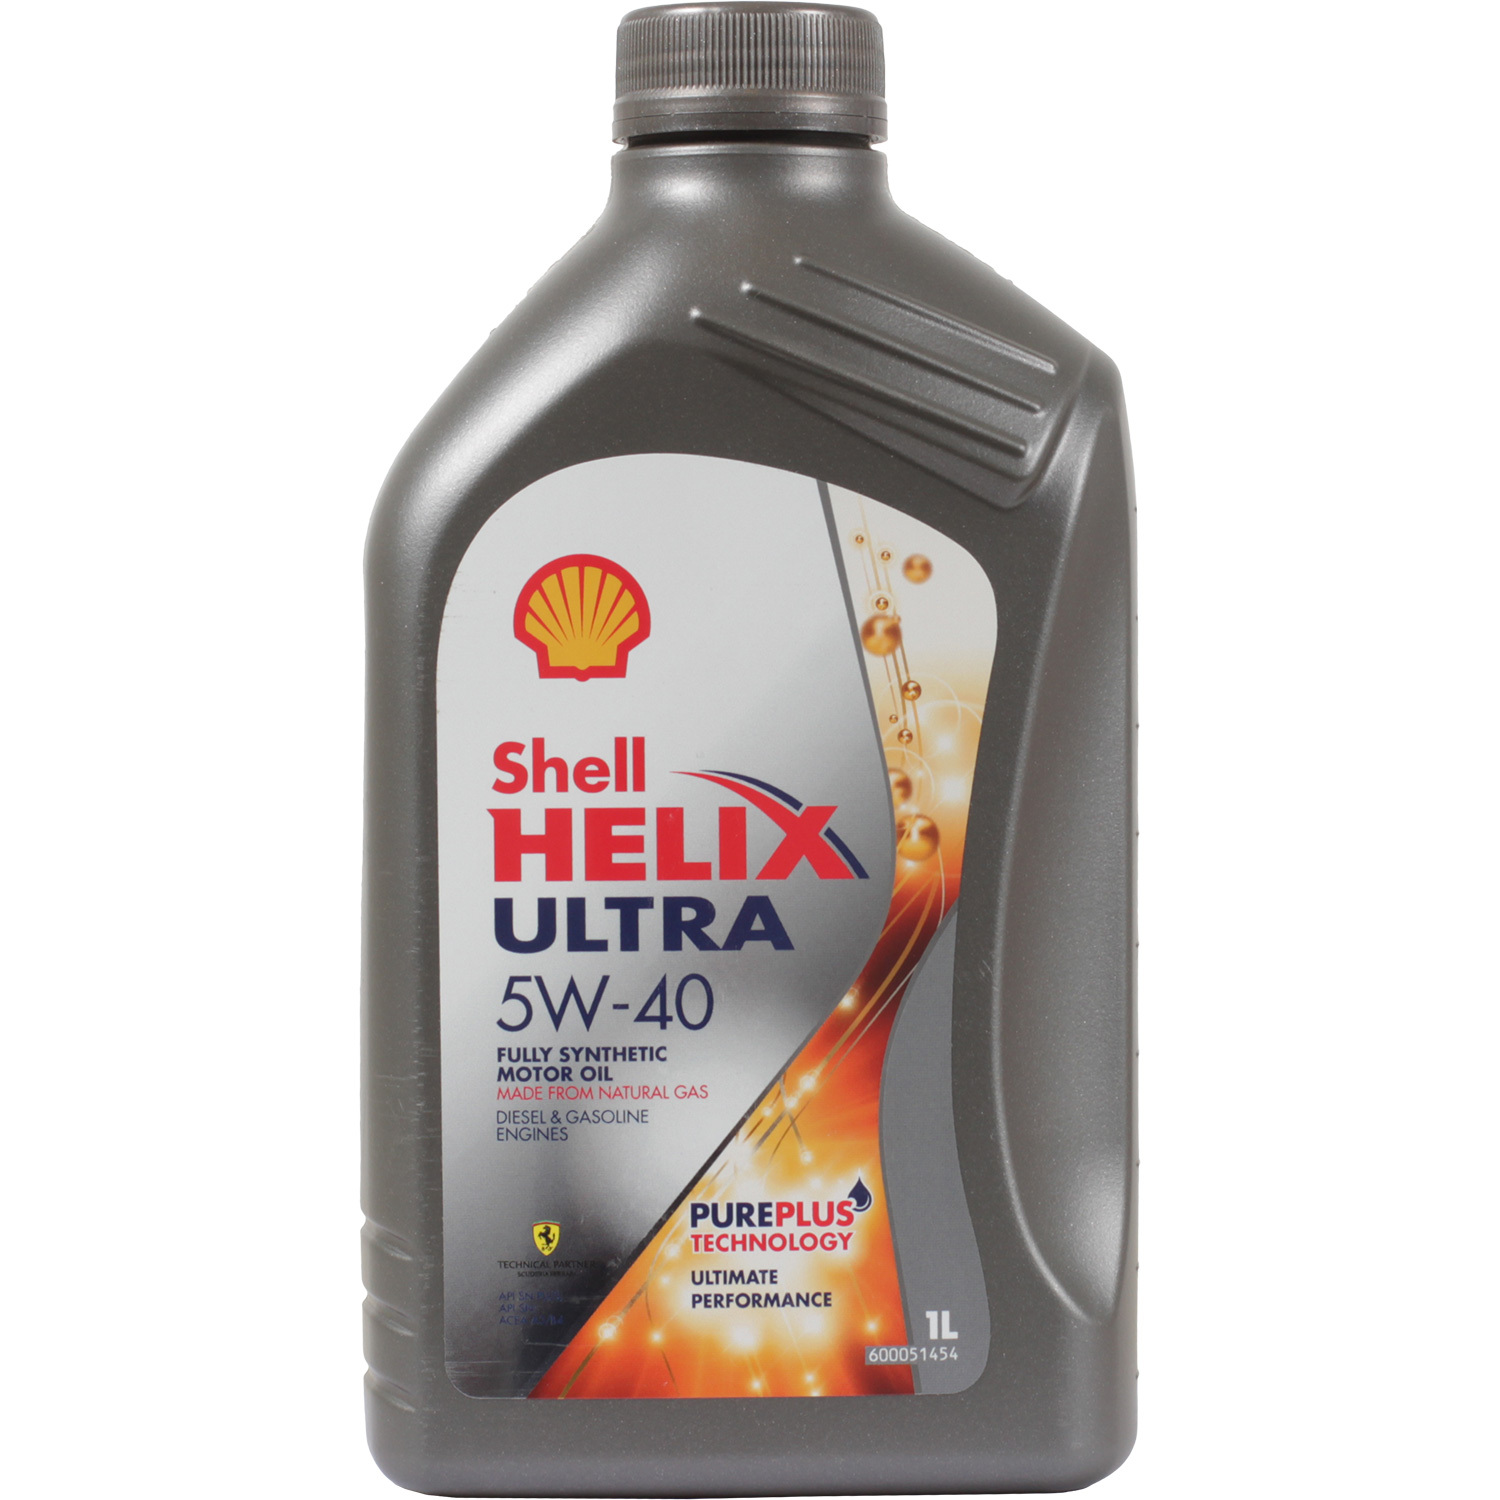 Shell Моторное масло Shell Helix Ultra 5W-40, 1 л масло моторное shell helix ultra 5w 40 1 л